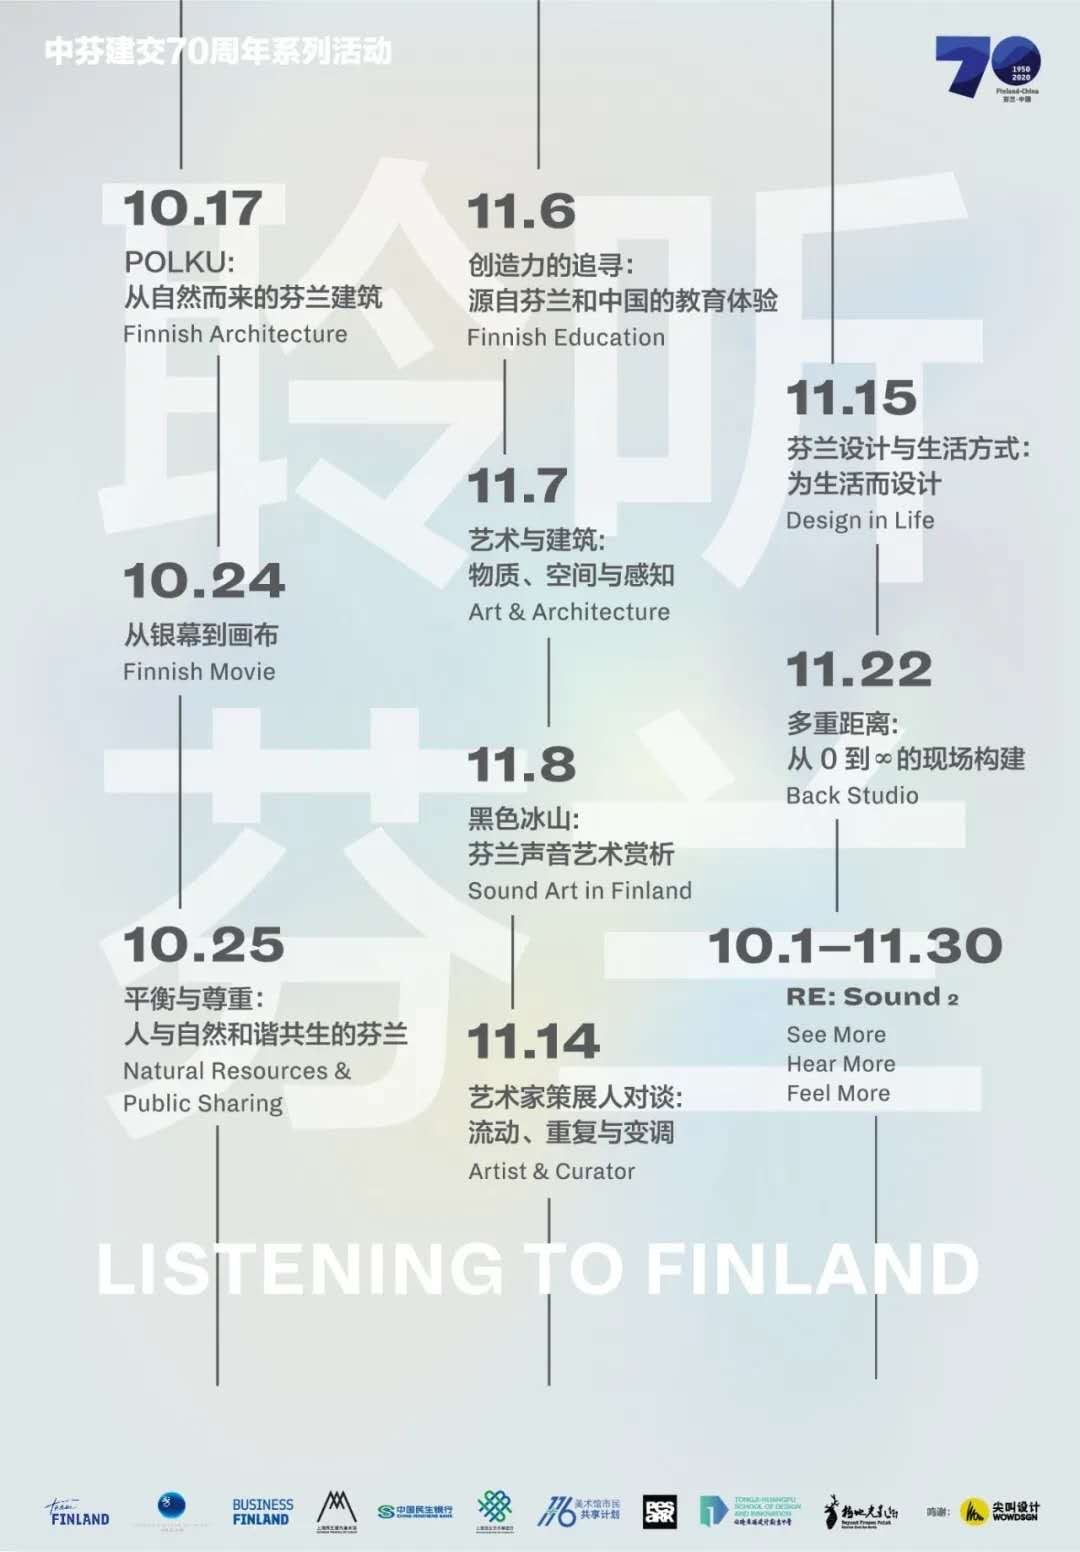 The Shanghai Minsheng Art Museum hosts "Listening to Finland" exhibition on 17 Oct until end of Nov - 16